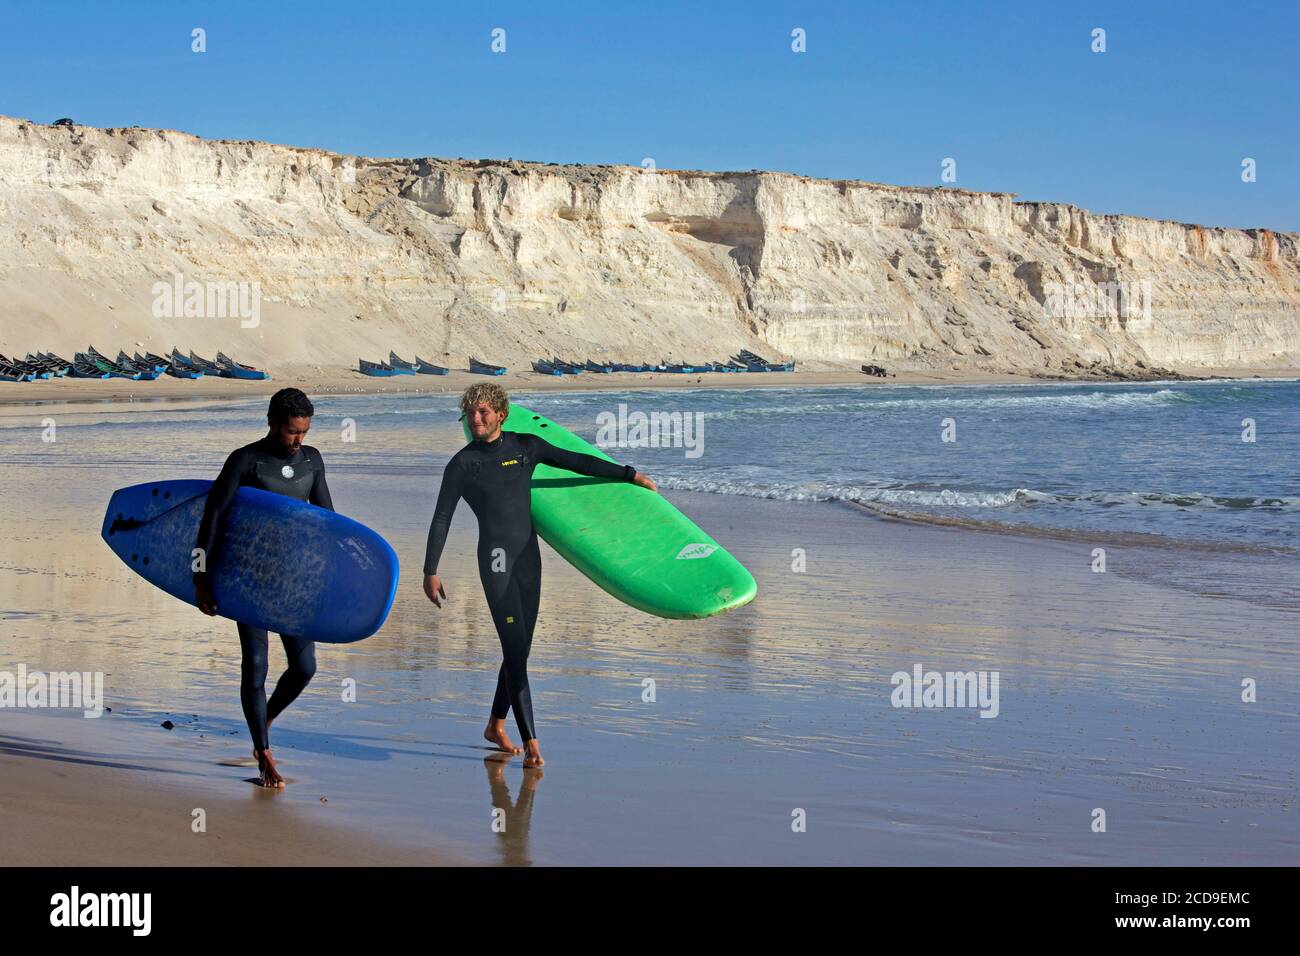 Morocco, Western Sahara, Dakhla, two Moroccan surfers with their boards on the beach of Araiche bordered by a cliff Stock Photo